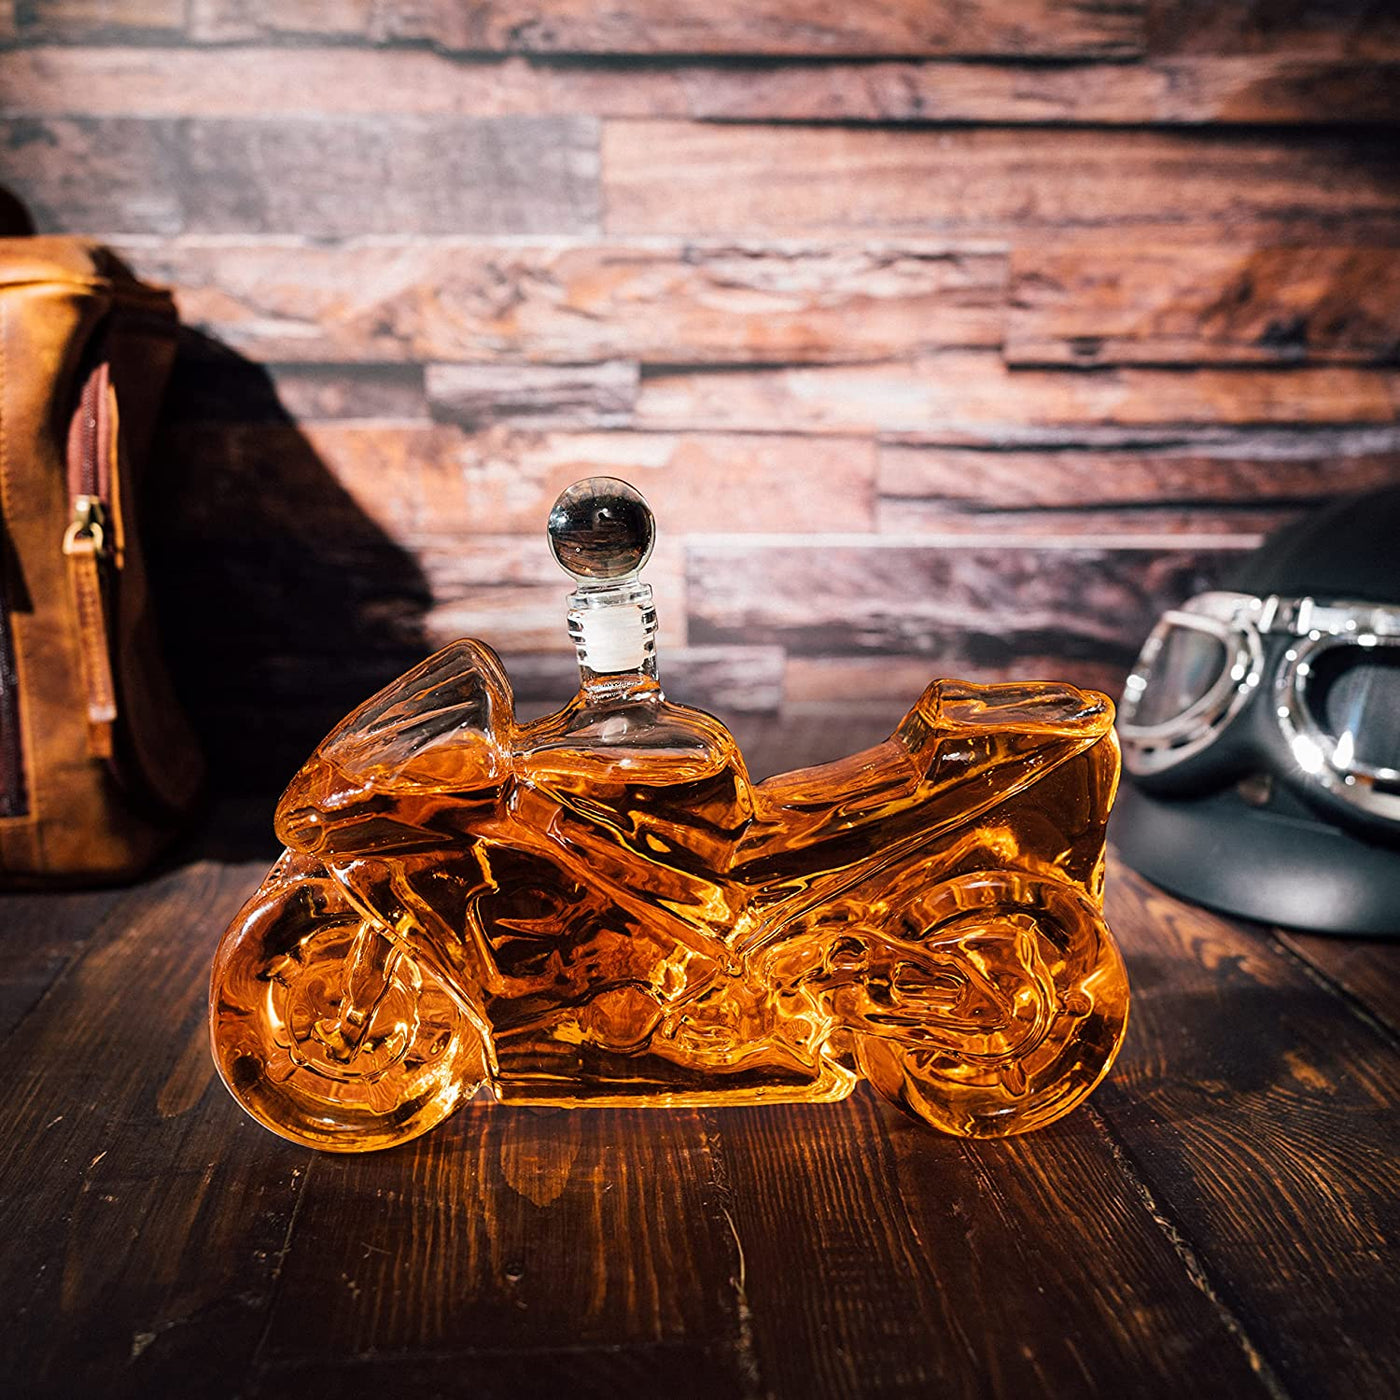 Motorbike Motorcycle Gift Decanter For Wine & Whiskey 750ml by Liquor Lux, Whiskey Gifts, Motorcycle Gifts, Sport Bike Gifts, Hell Ghost Harley-Davidson, Beer Scotch Bourbon Spirits Gifts for Men